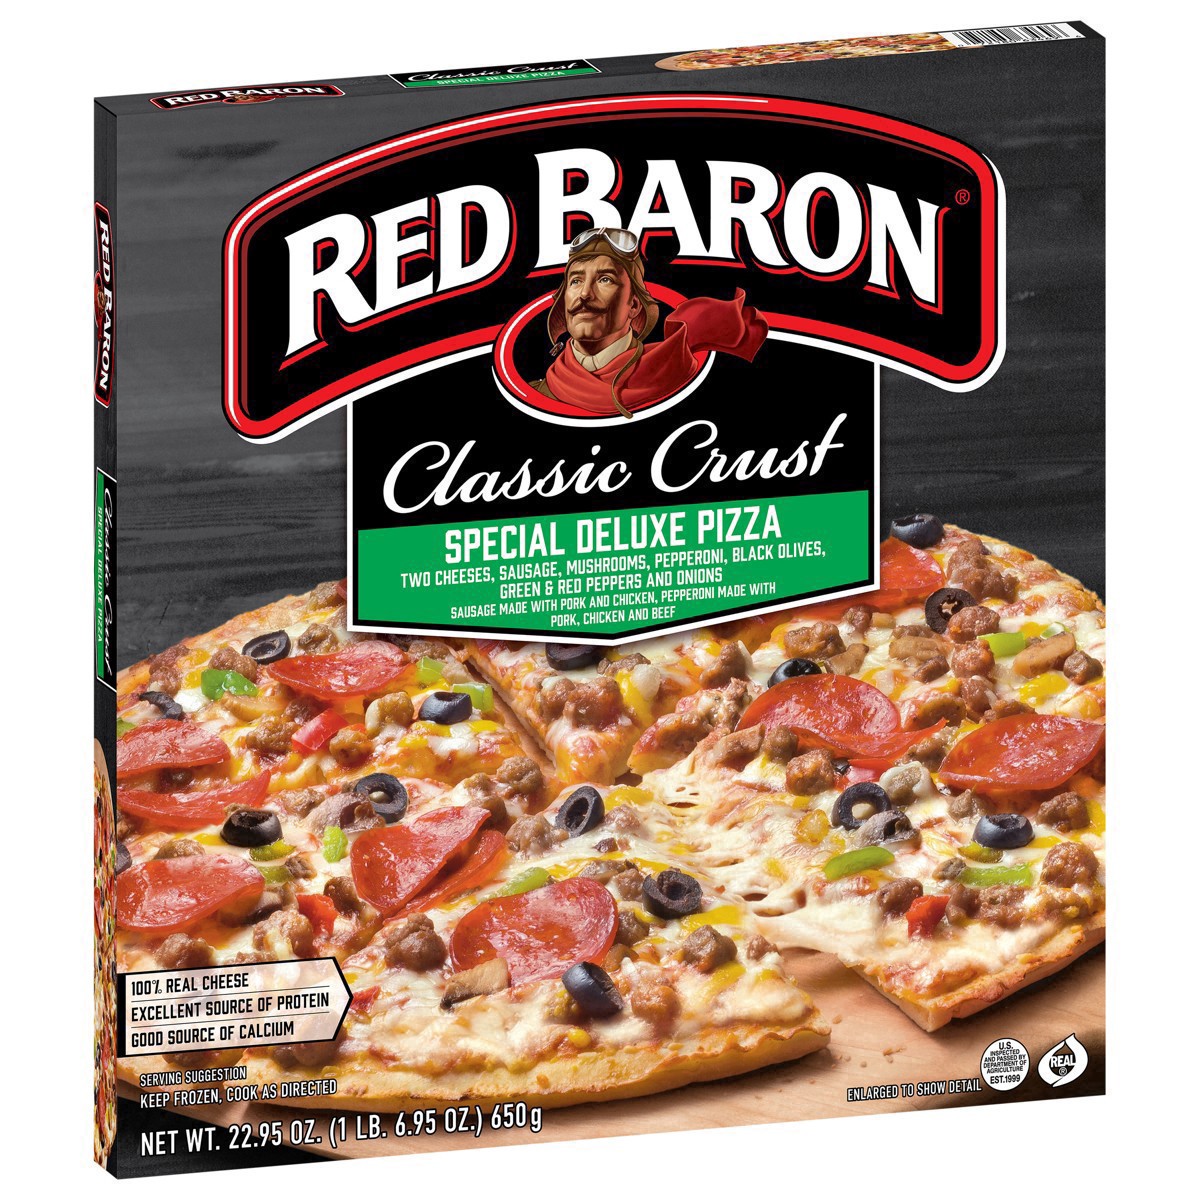 slide 61 of 89, Red Baron Frozen Pizza Classic Crust Special Deluxe, 1.43 lb